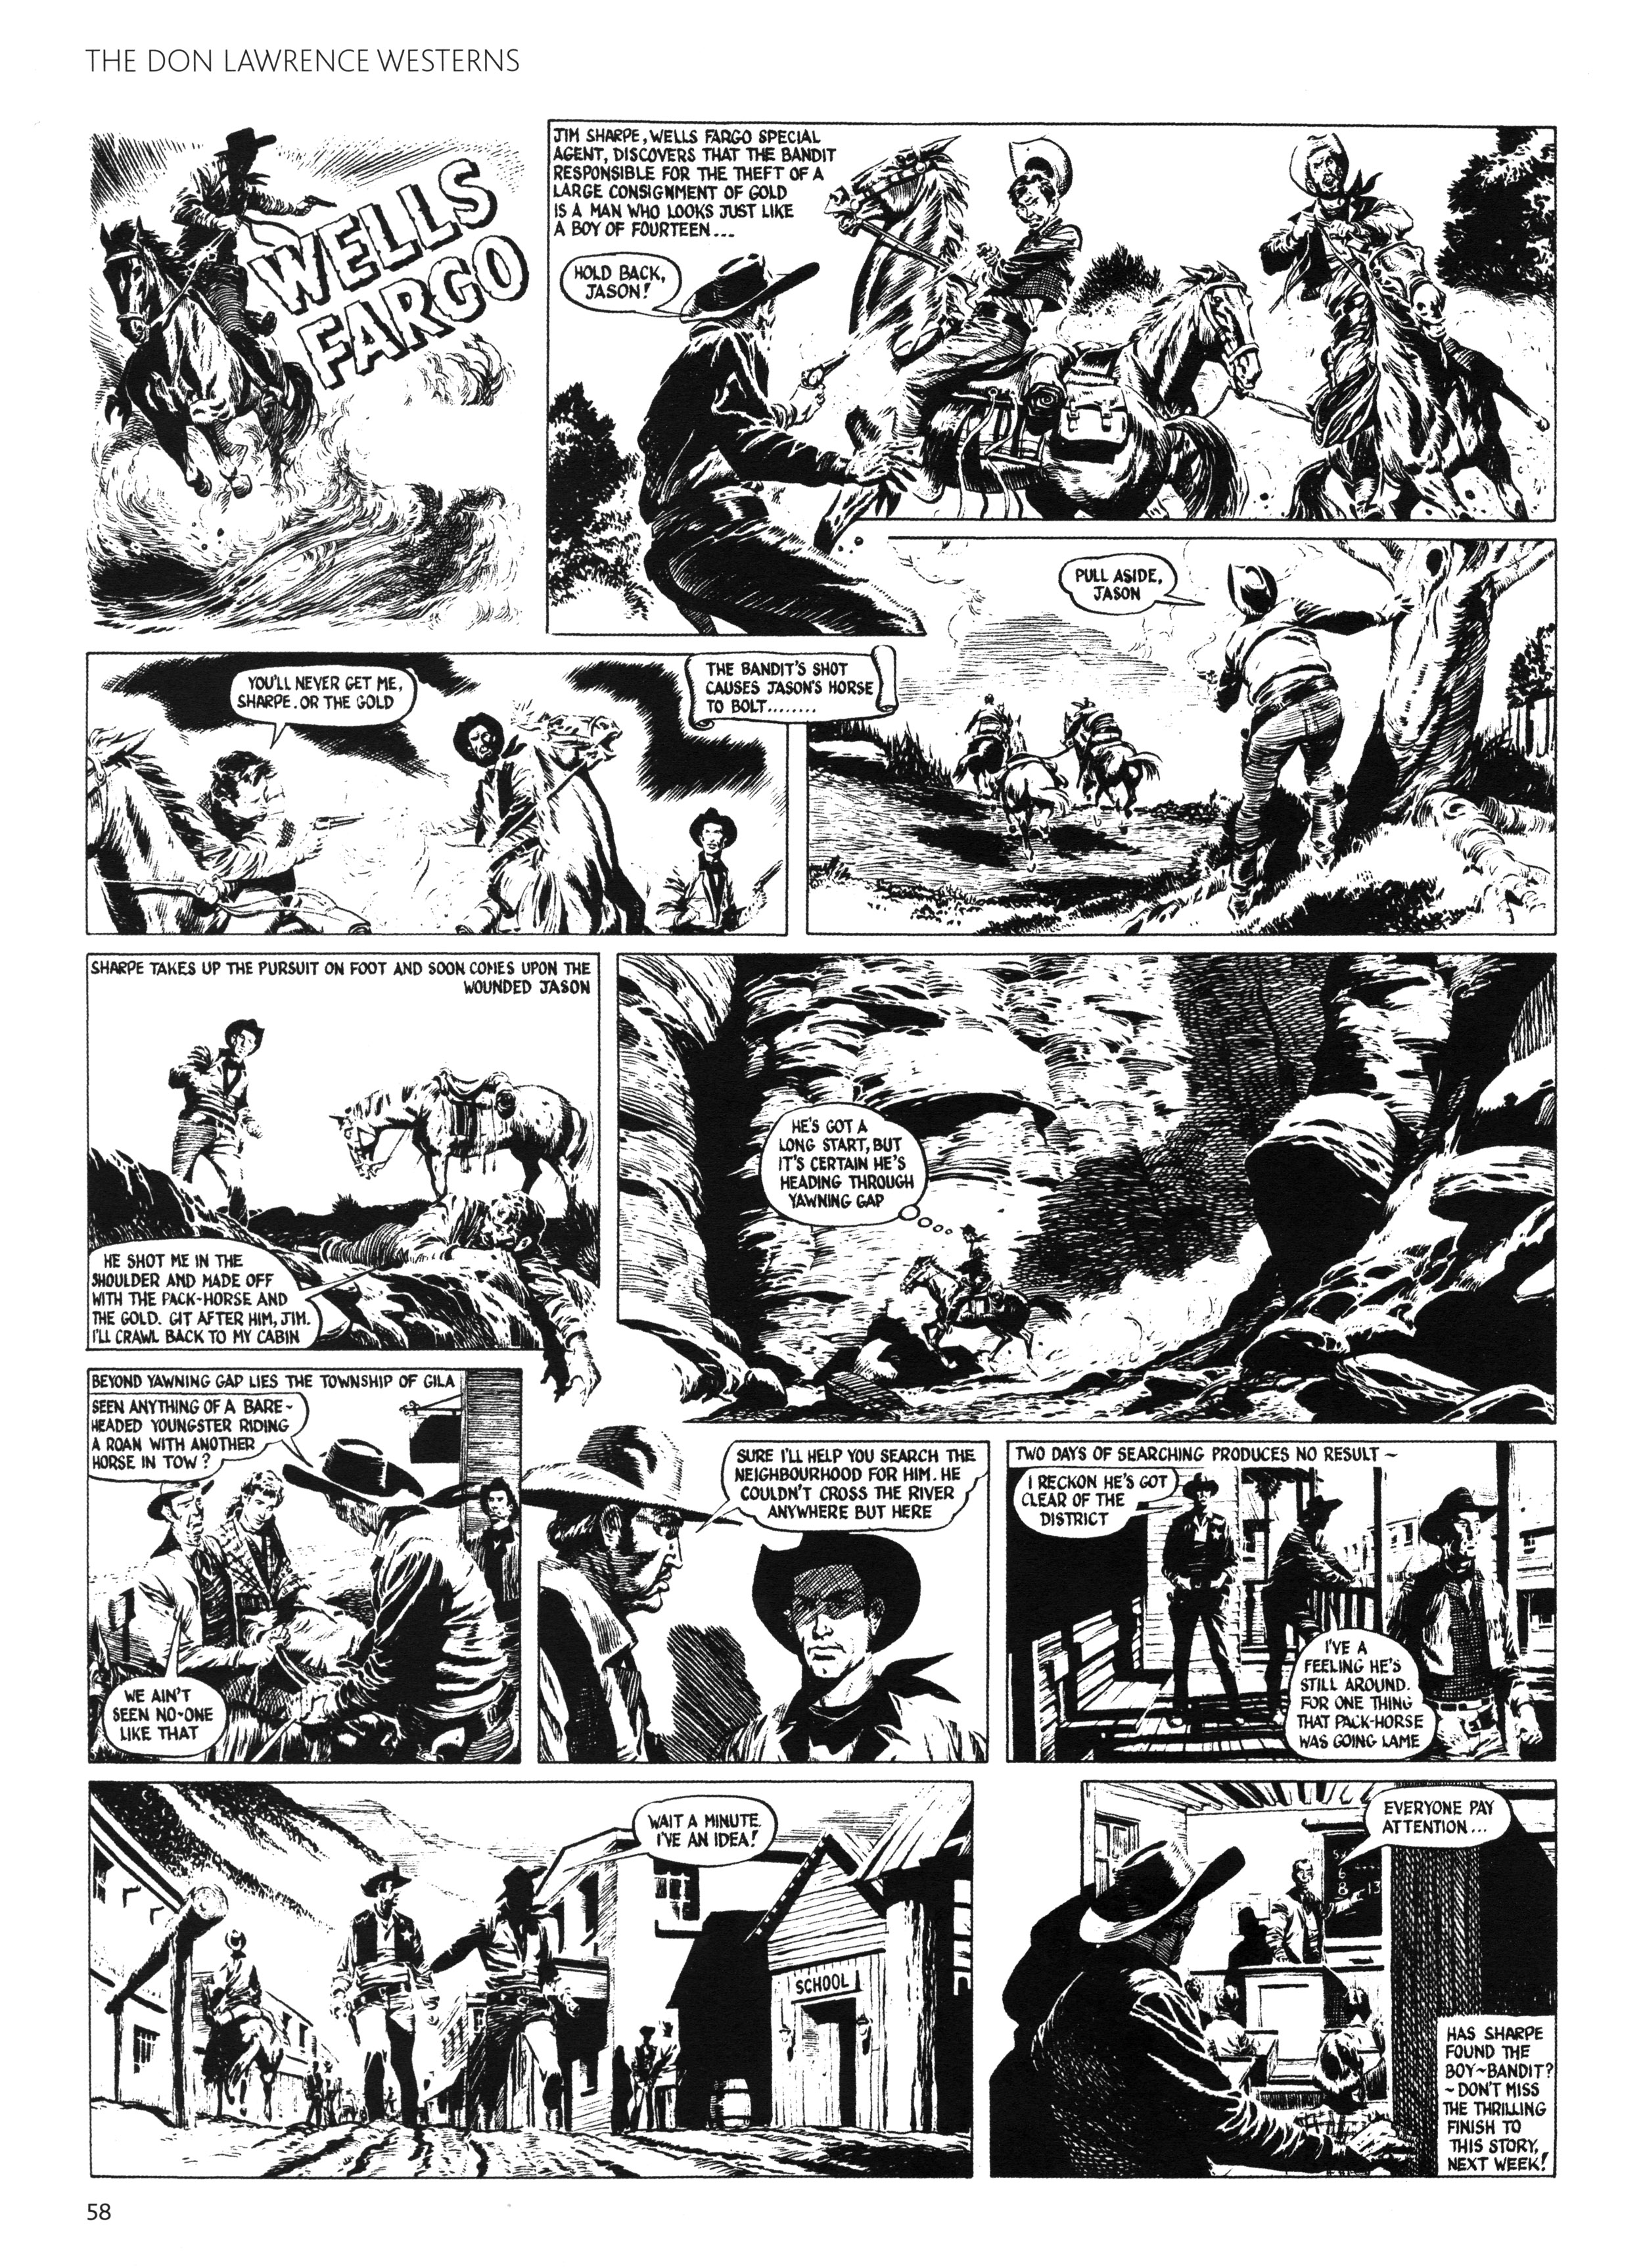 Read online Don Lawrence Westerns comic -  Issue # TPB (Part 1) - 62